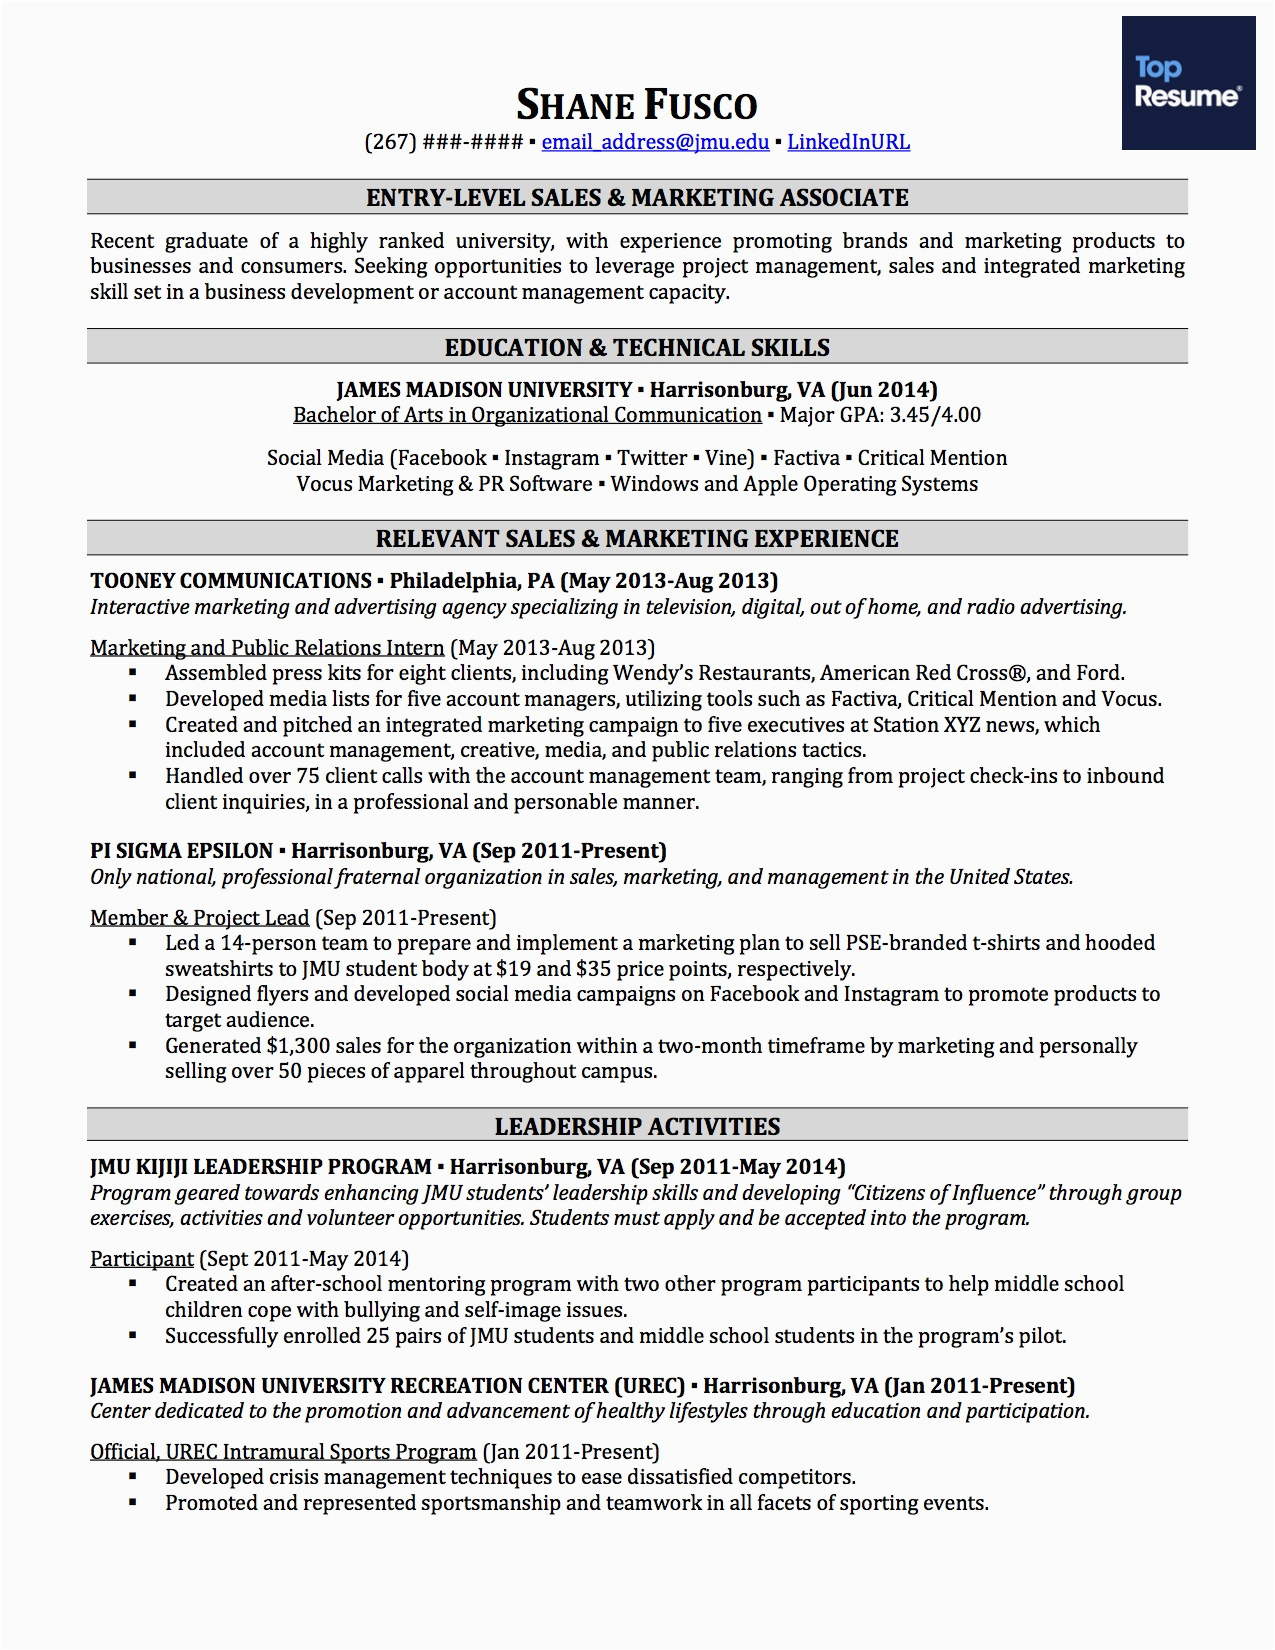 Sample Objectives for Resumes with No Job Experience How to Write A Resume with No Job Experience